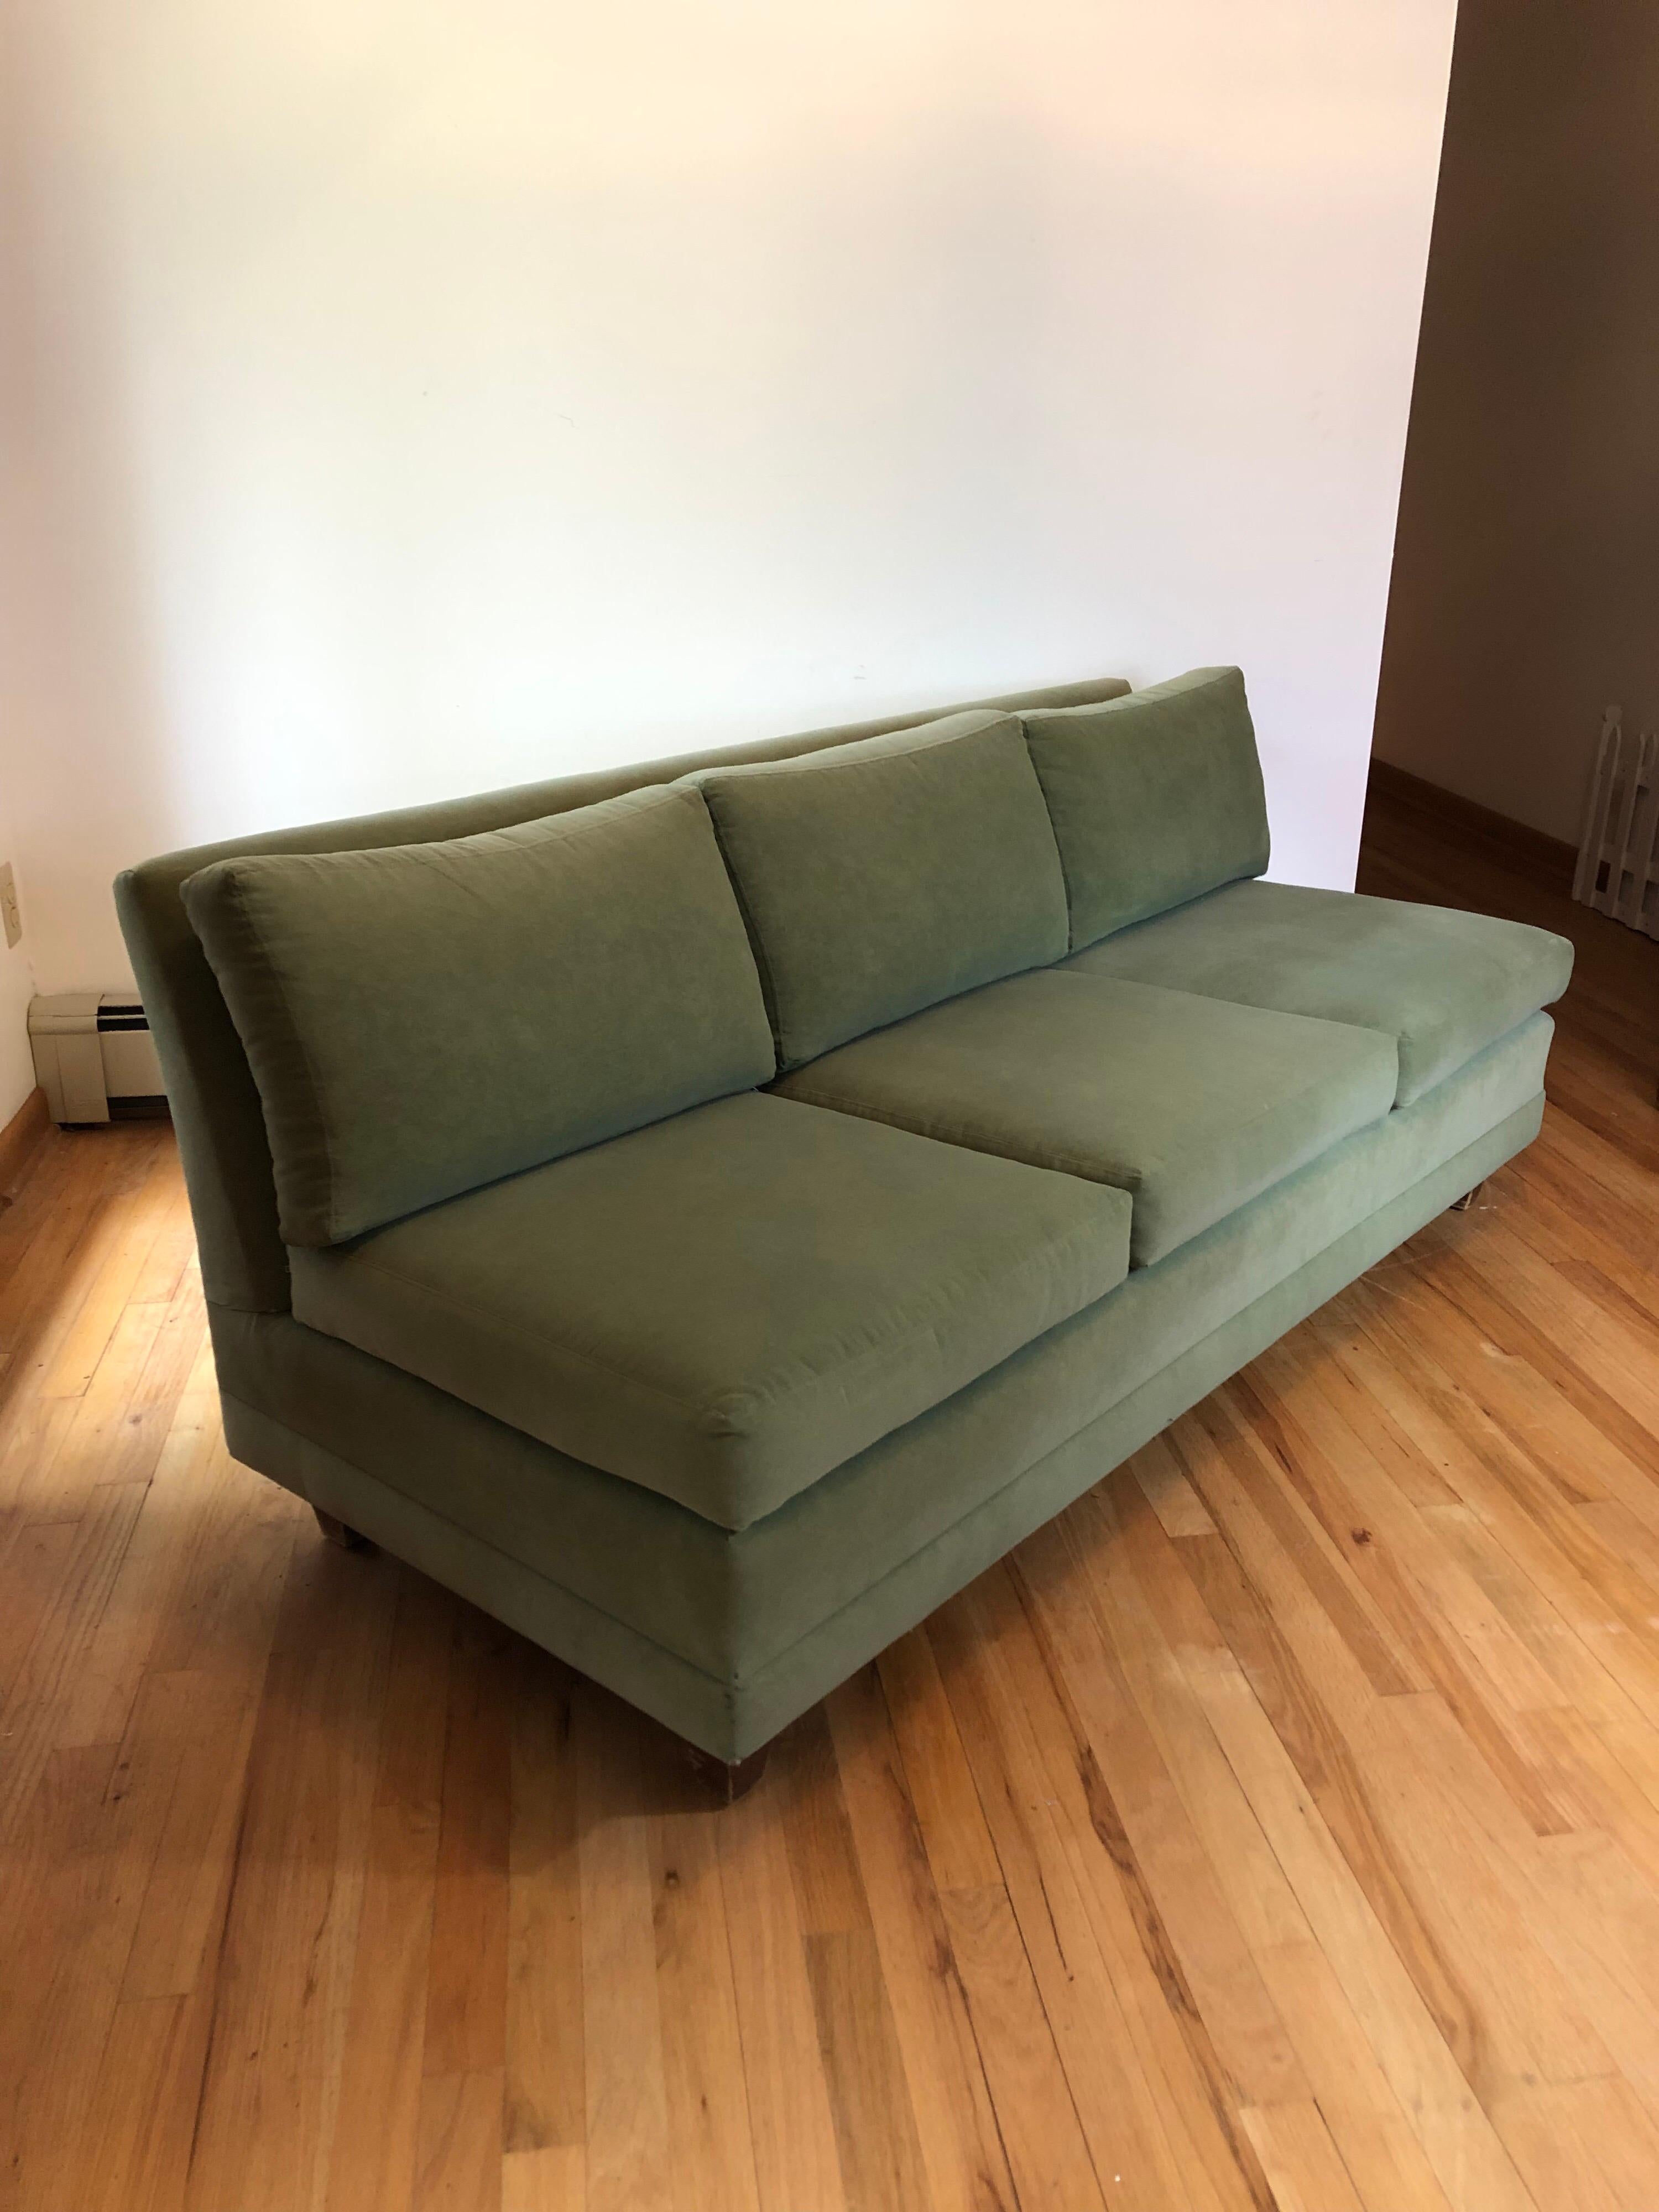 A midcentury armless slipper sofa with slight curved back. Low pile light green velvet upholstery and cushions are in excellent condition. Raised on square tapered feet. From a collection including similar seating by Knoll.